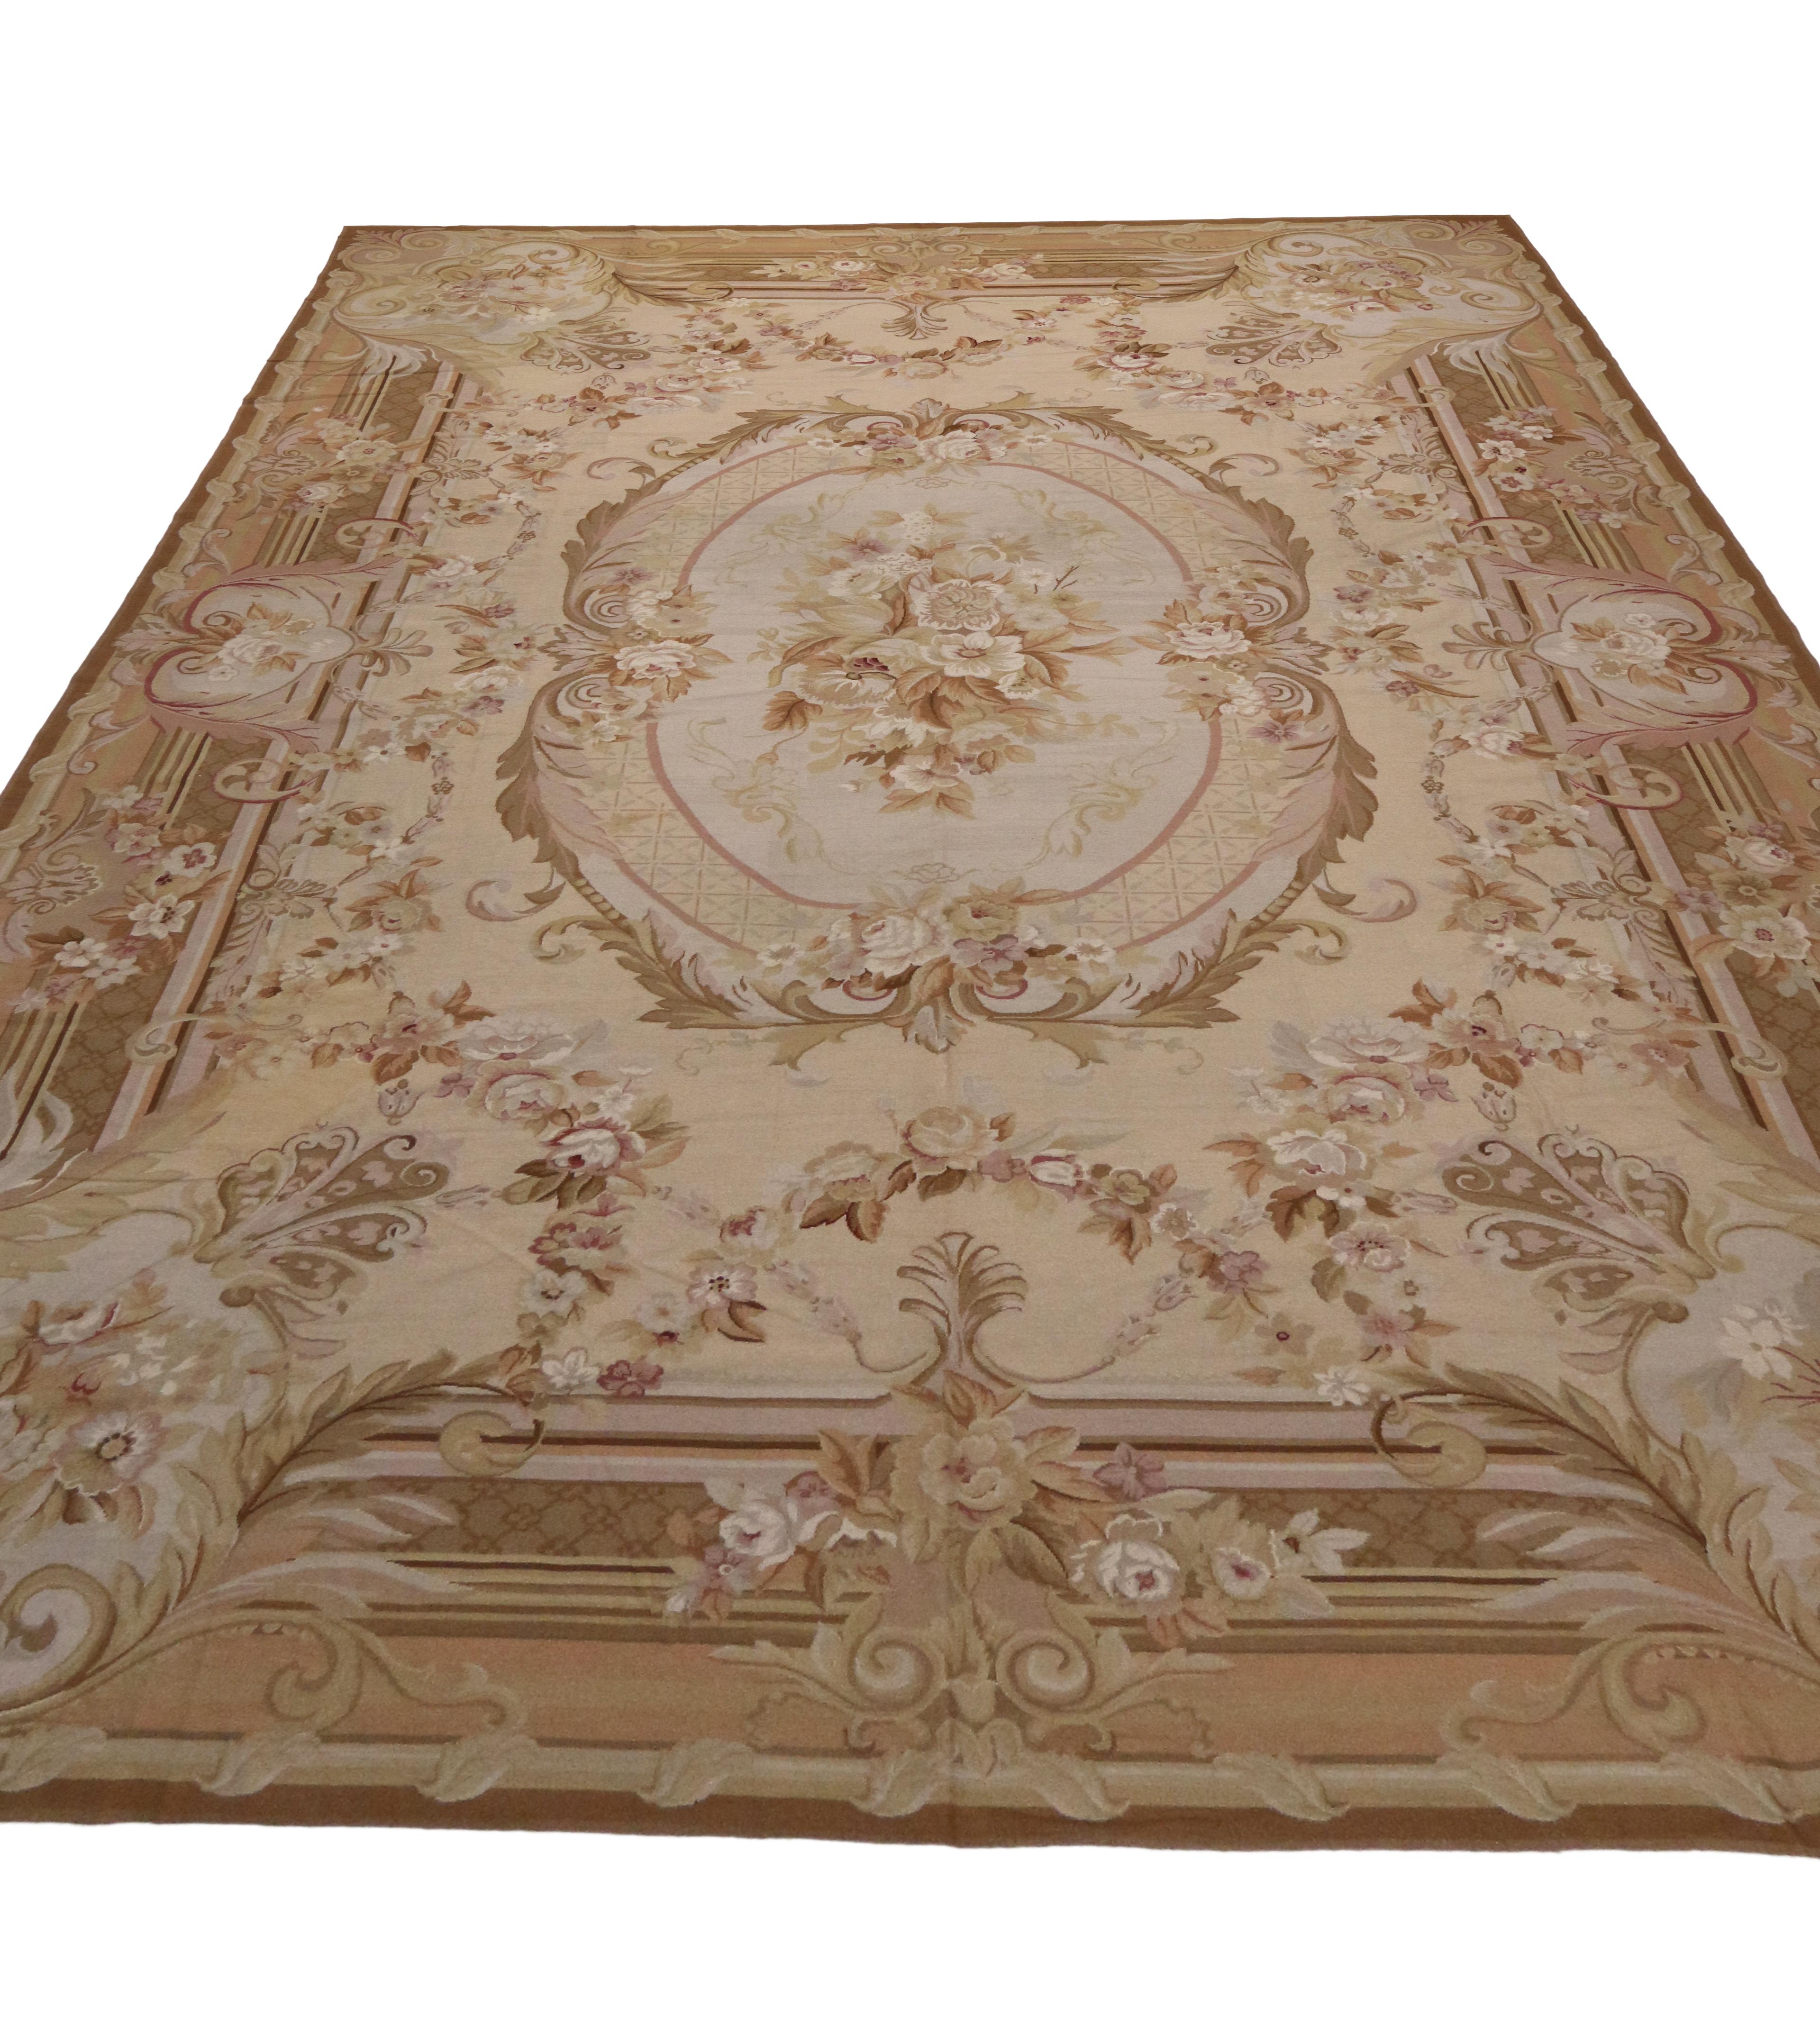 Hand-Knotted Vintage Portuguese Needlepoint Rug with French Aubusson Style